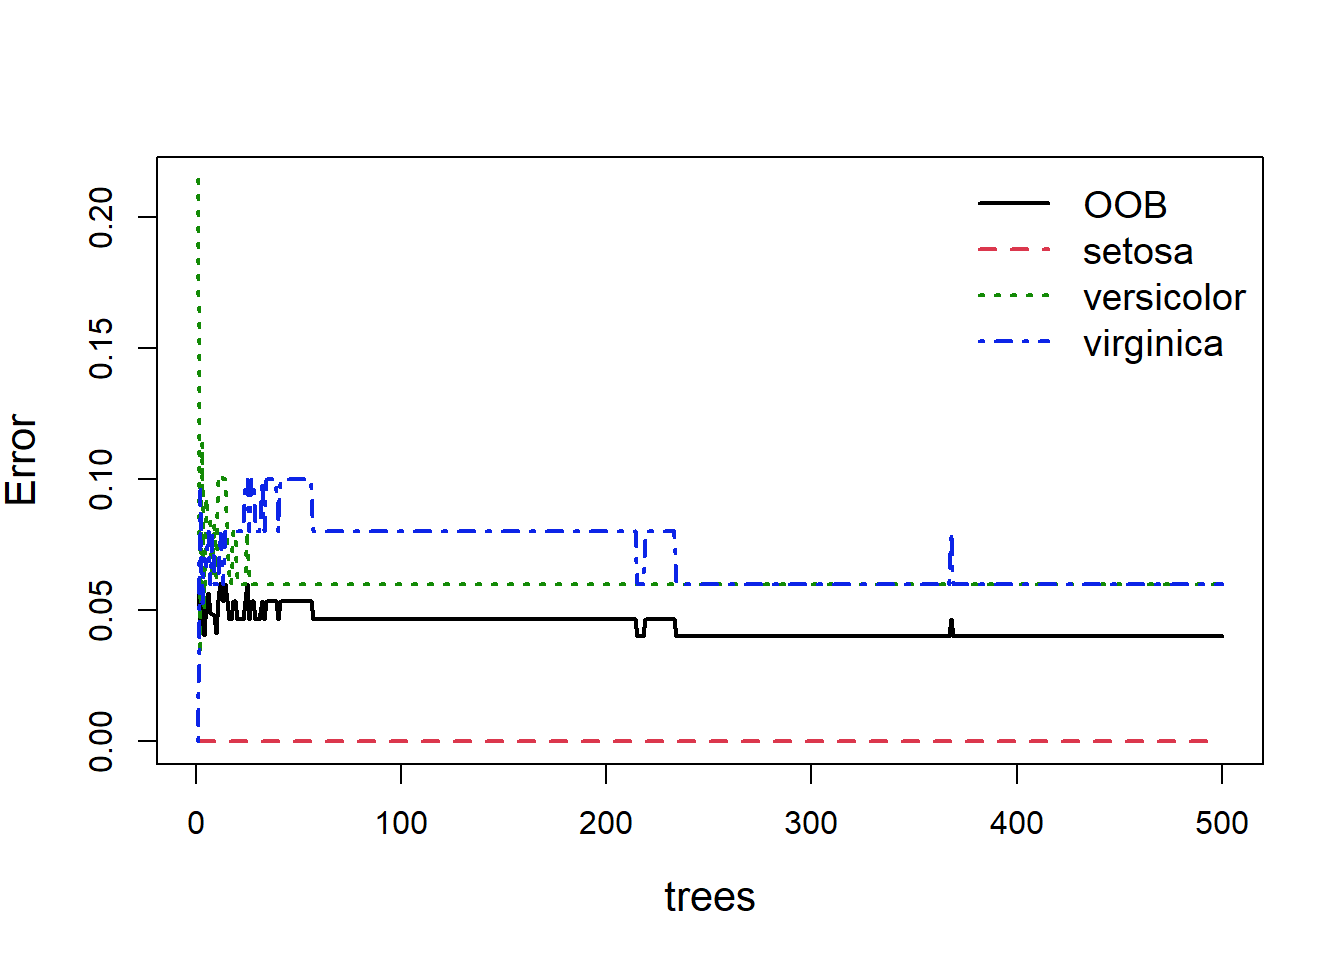 A plot with y-axis labelled 'Error' and x-axis labelled 'trees'. There are seperate lines labelled 'OOB', 'versicolor' and 'virginica' which show some fluctuations in error with fewer trees, while 'setosa' has no error and is parallel with the x-axis.